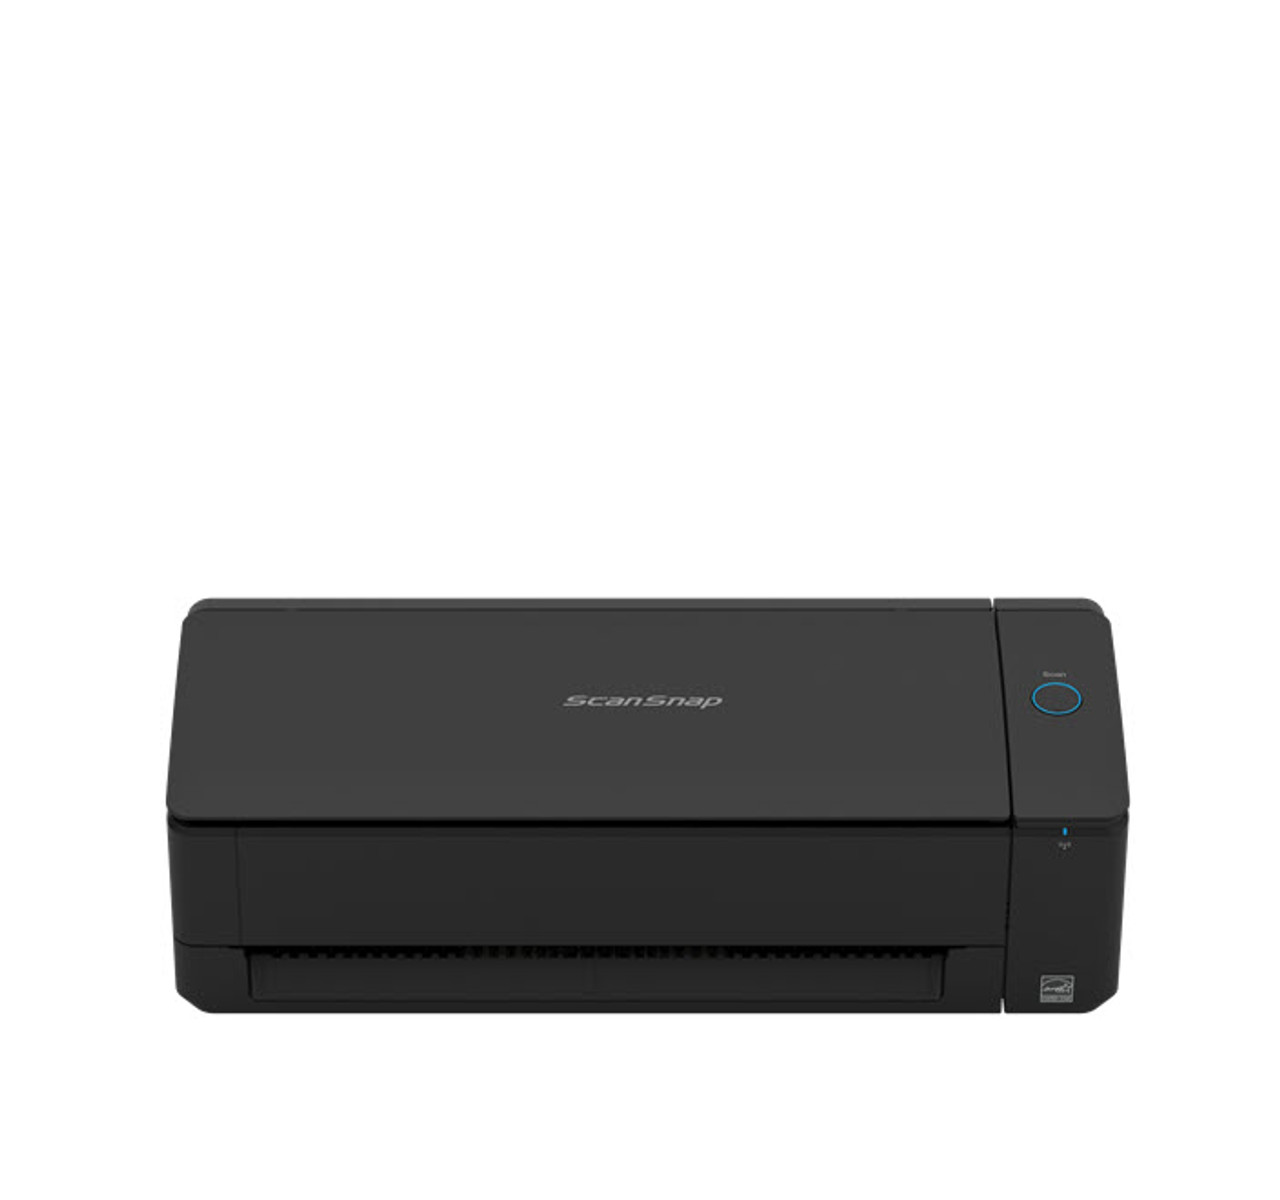 ScanSnap iX1300 Compact Wi-Fi Scanner for PC and Mac (Black)